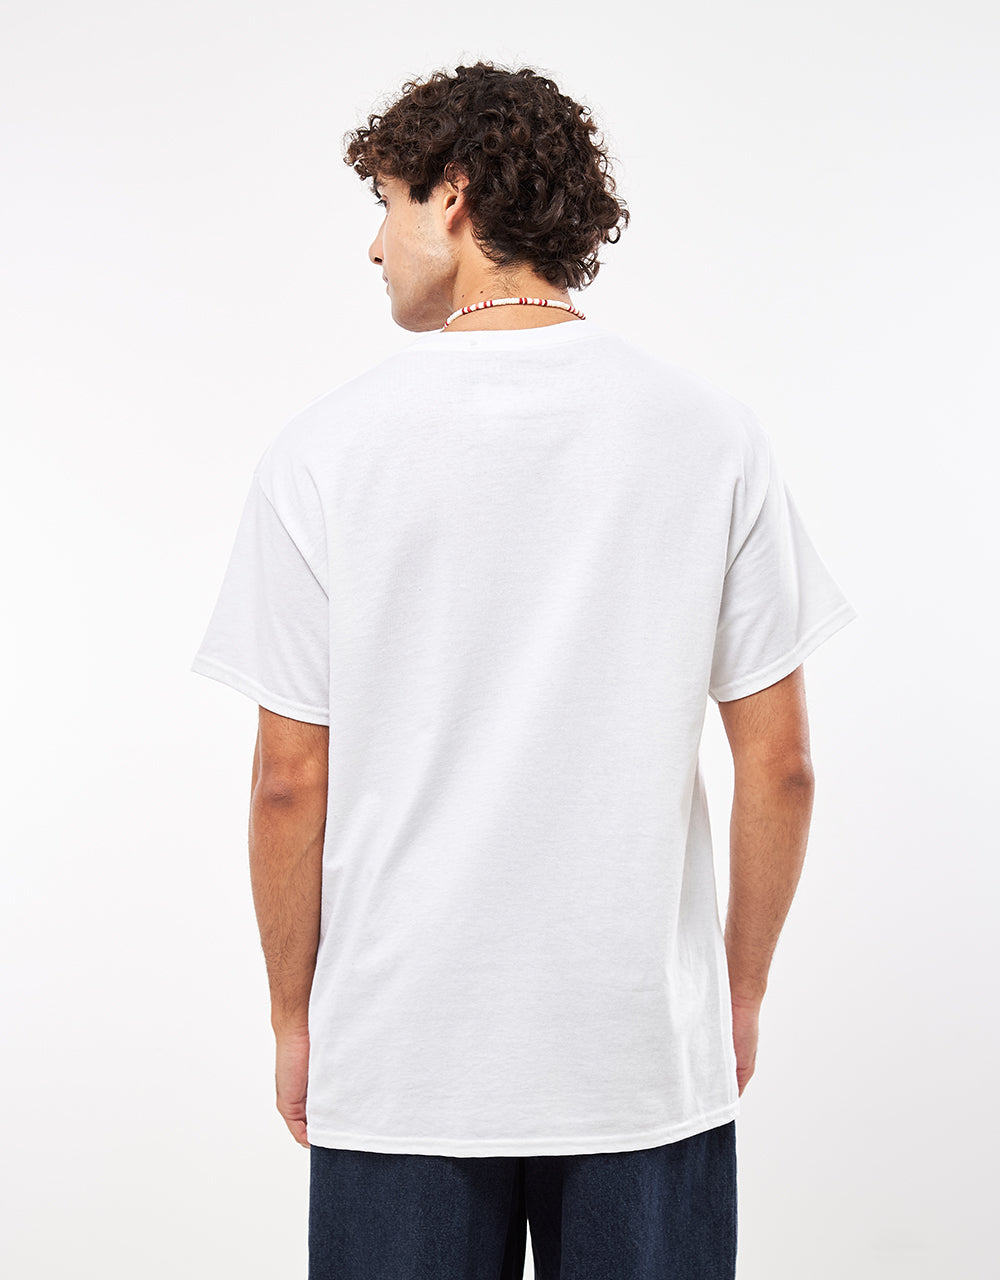 Route One Fluidity T-Shirt - White